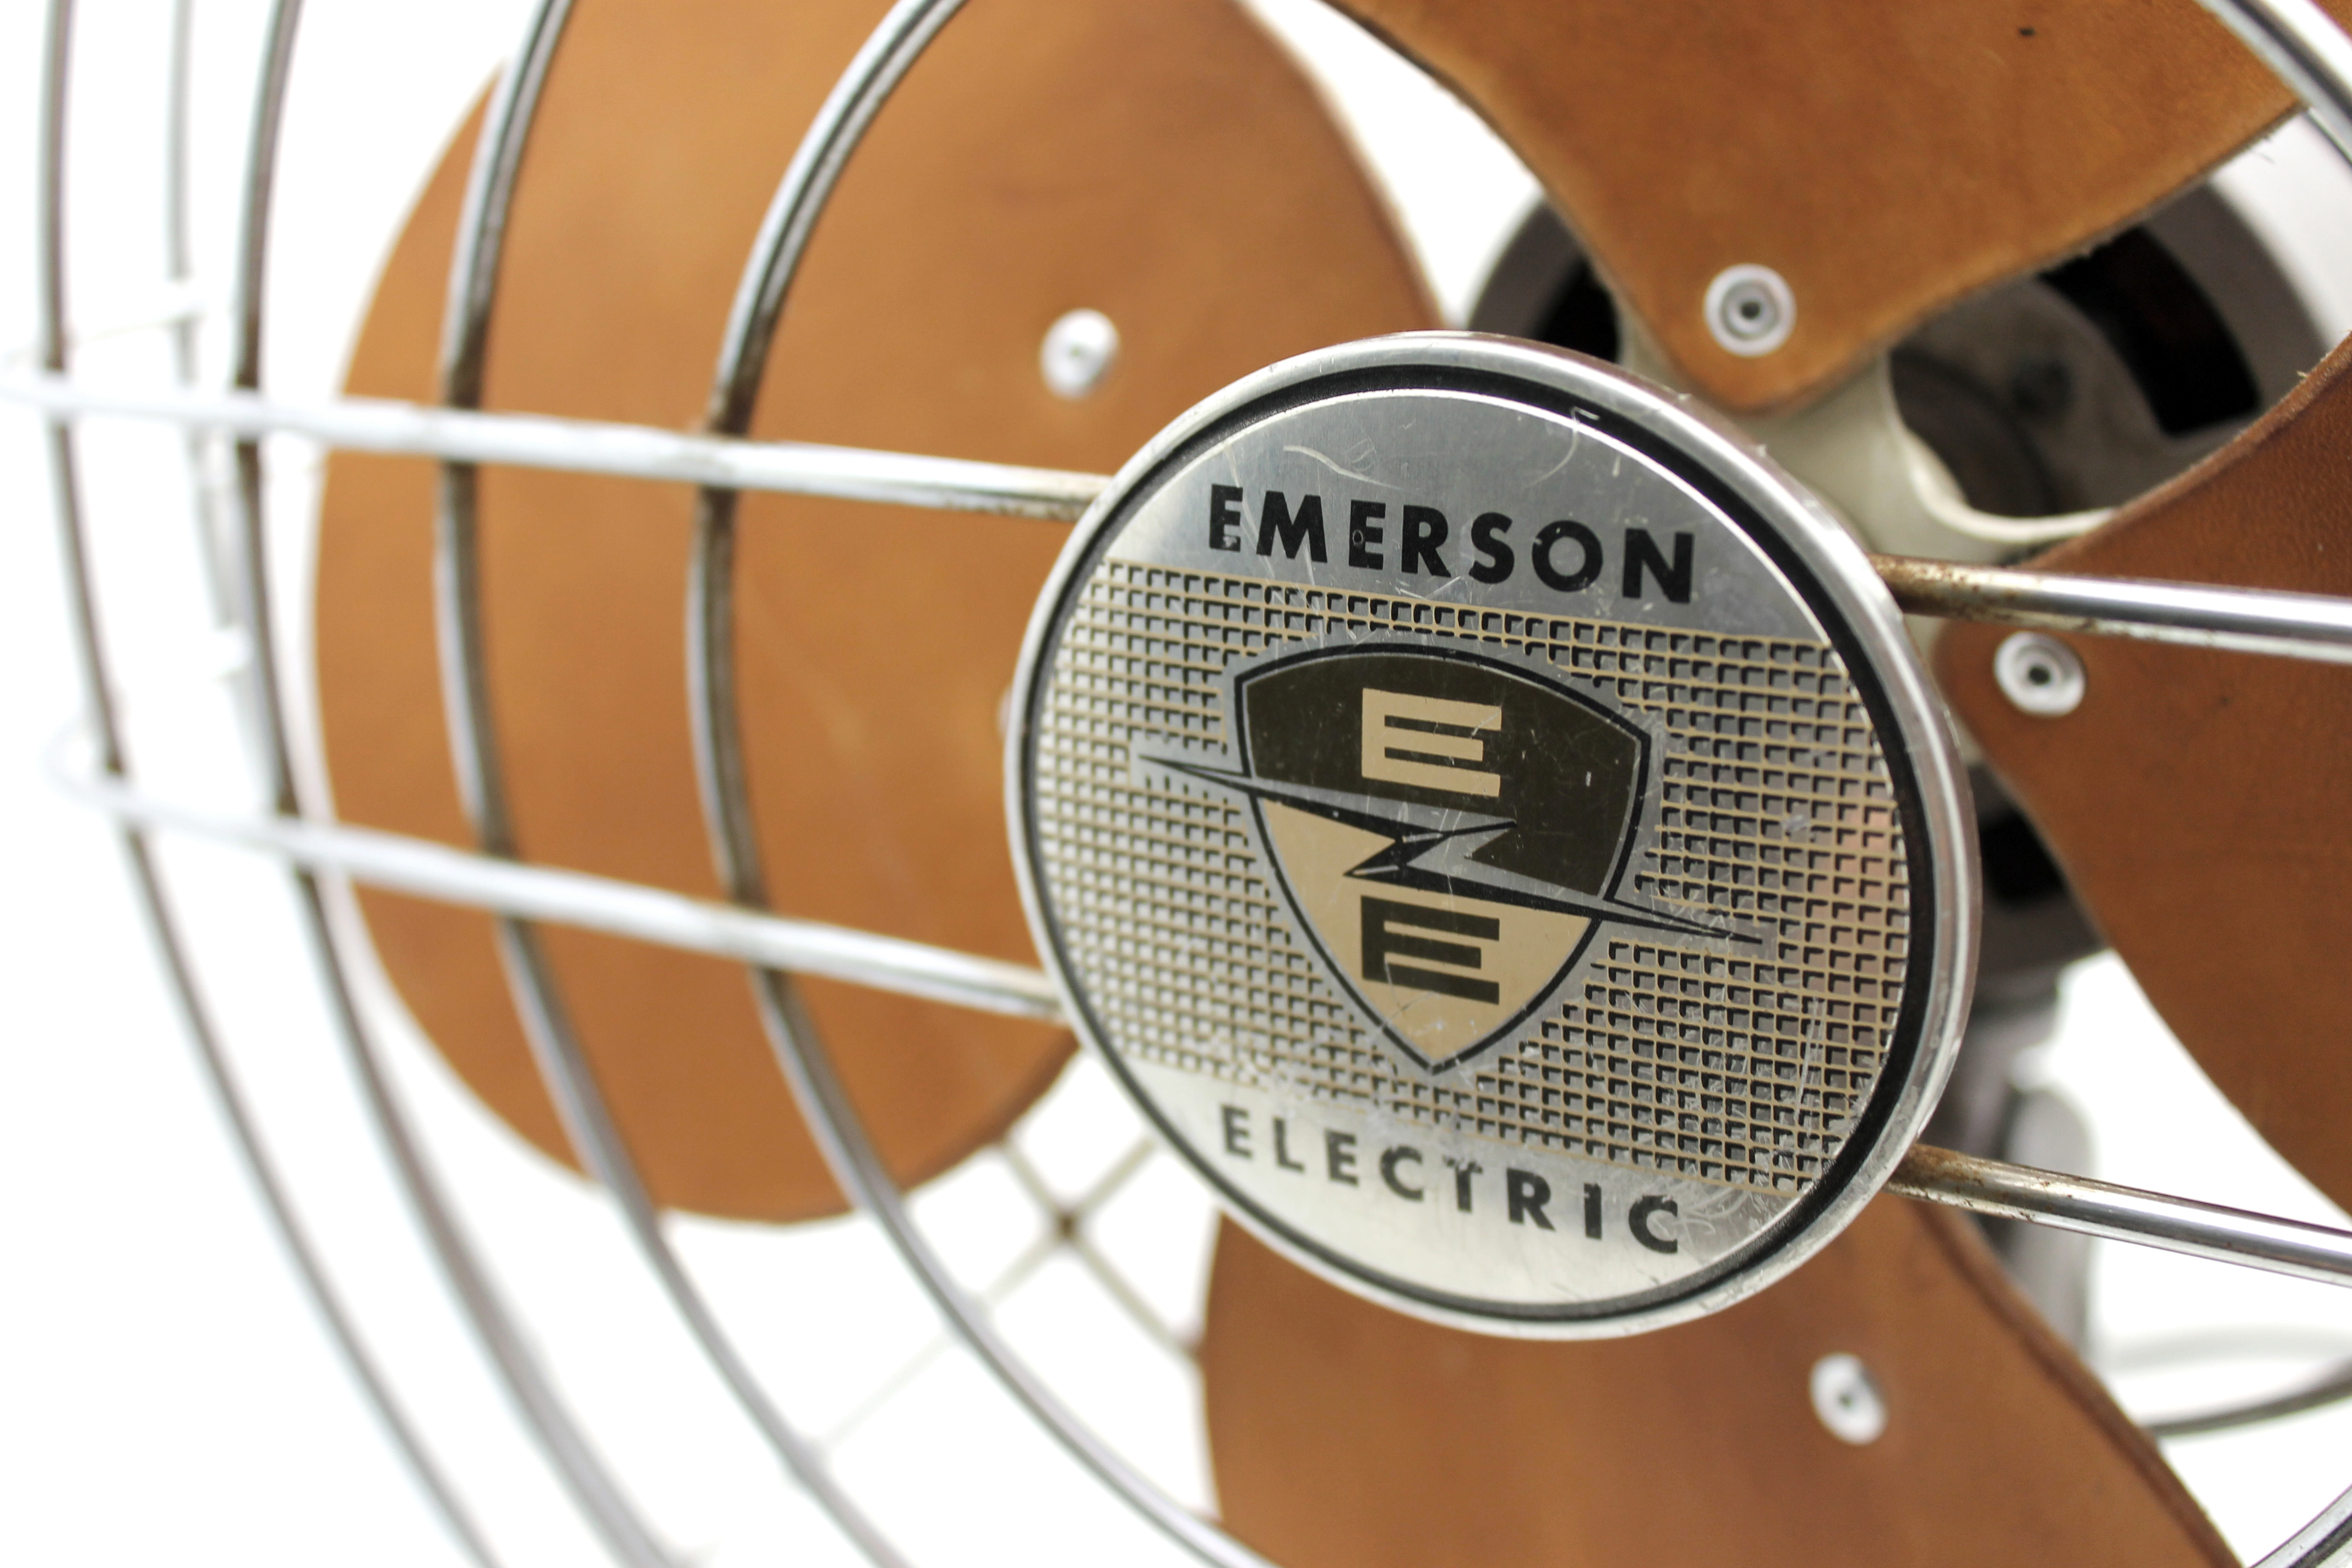 A close up shot of the EMERSON ELECTRIC logo medallion on the front of a wire fan cage, with the replaced leather blades out of focus behind.